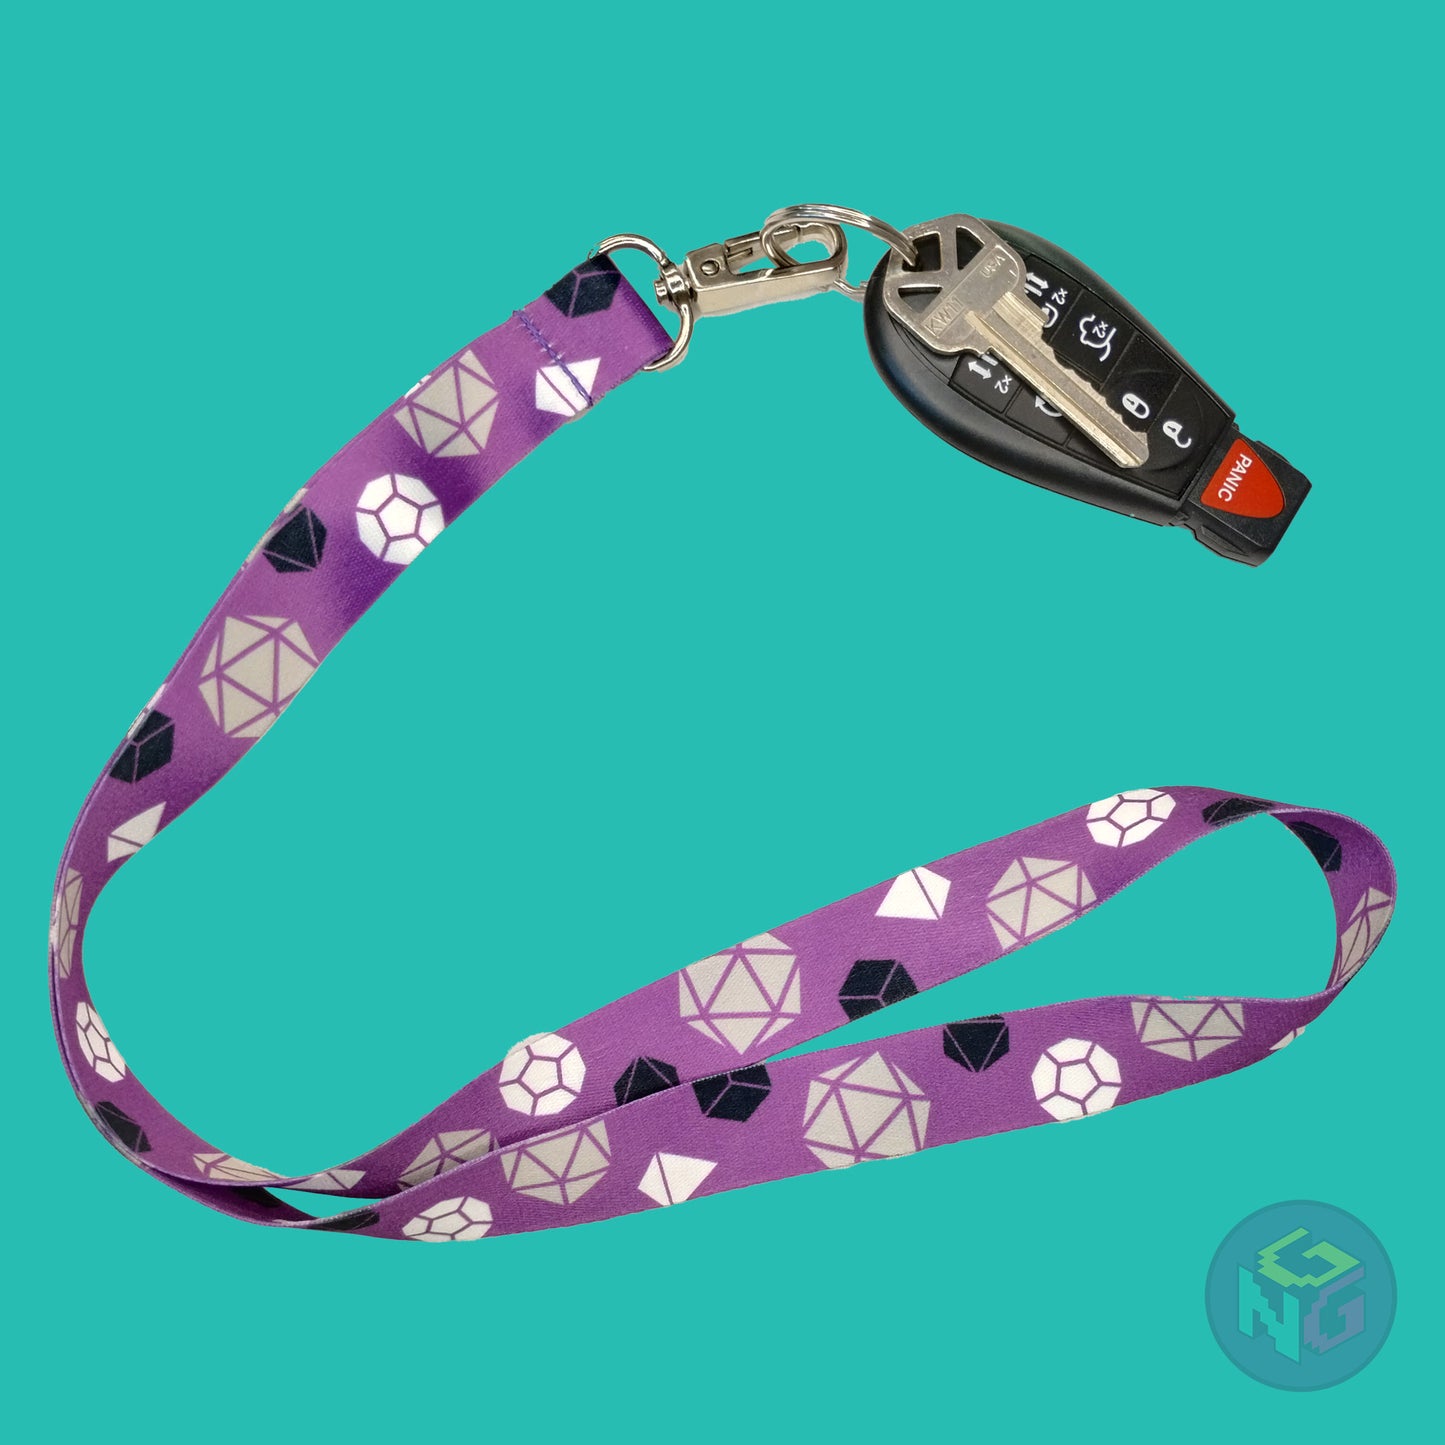 purple dnd asexual lanyard showing the black, white, and grey tabletop dice with a key fob clipped to the end of the lanyard